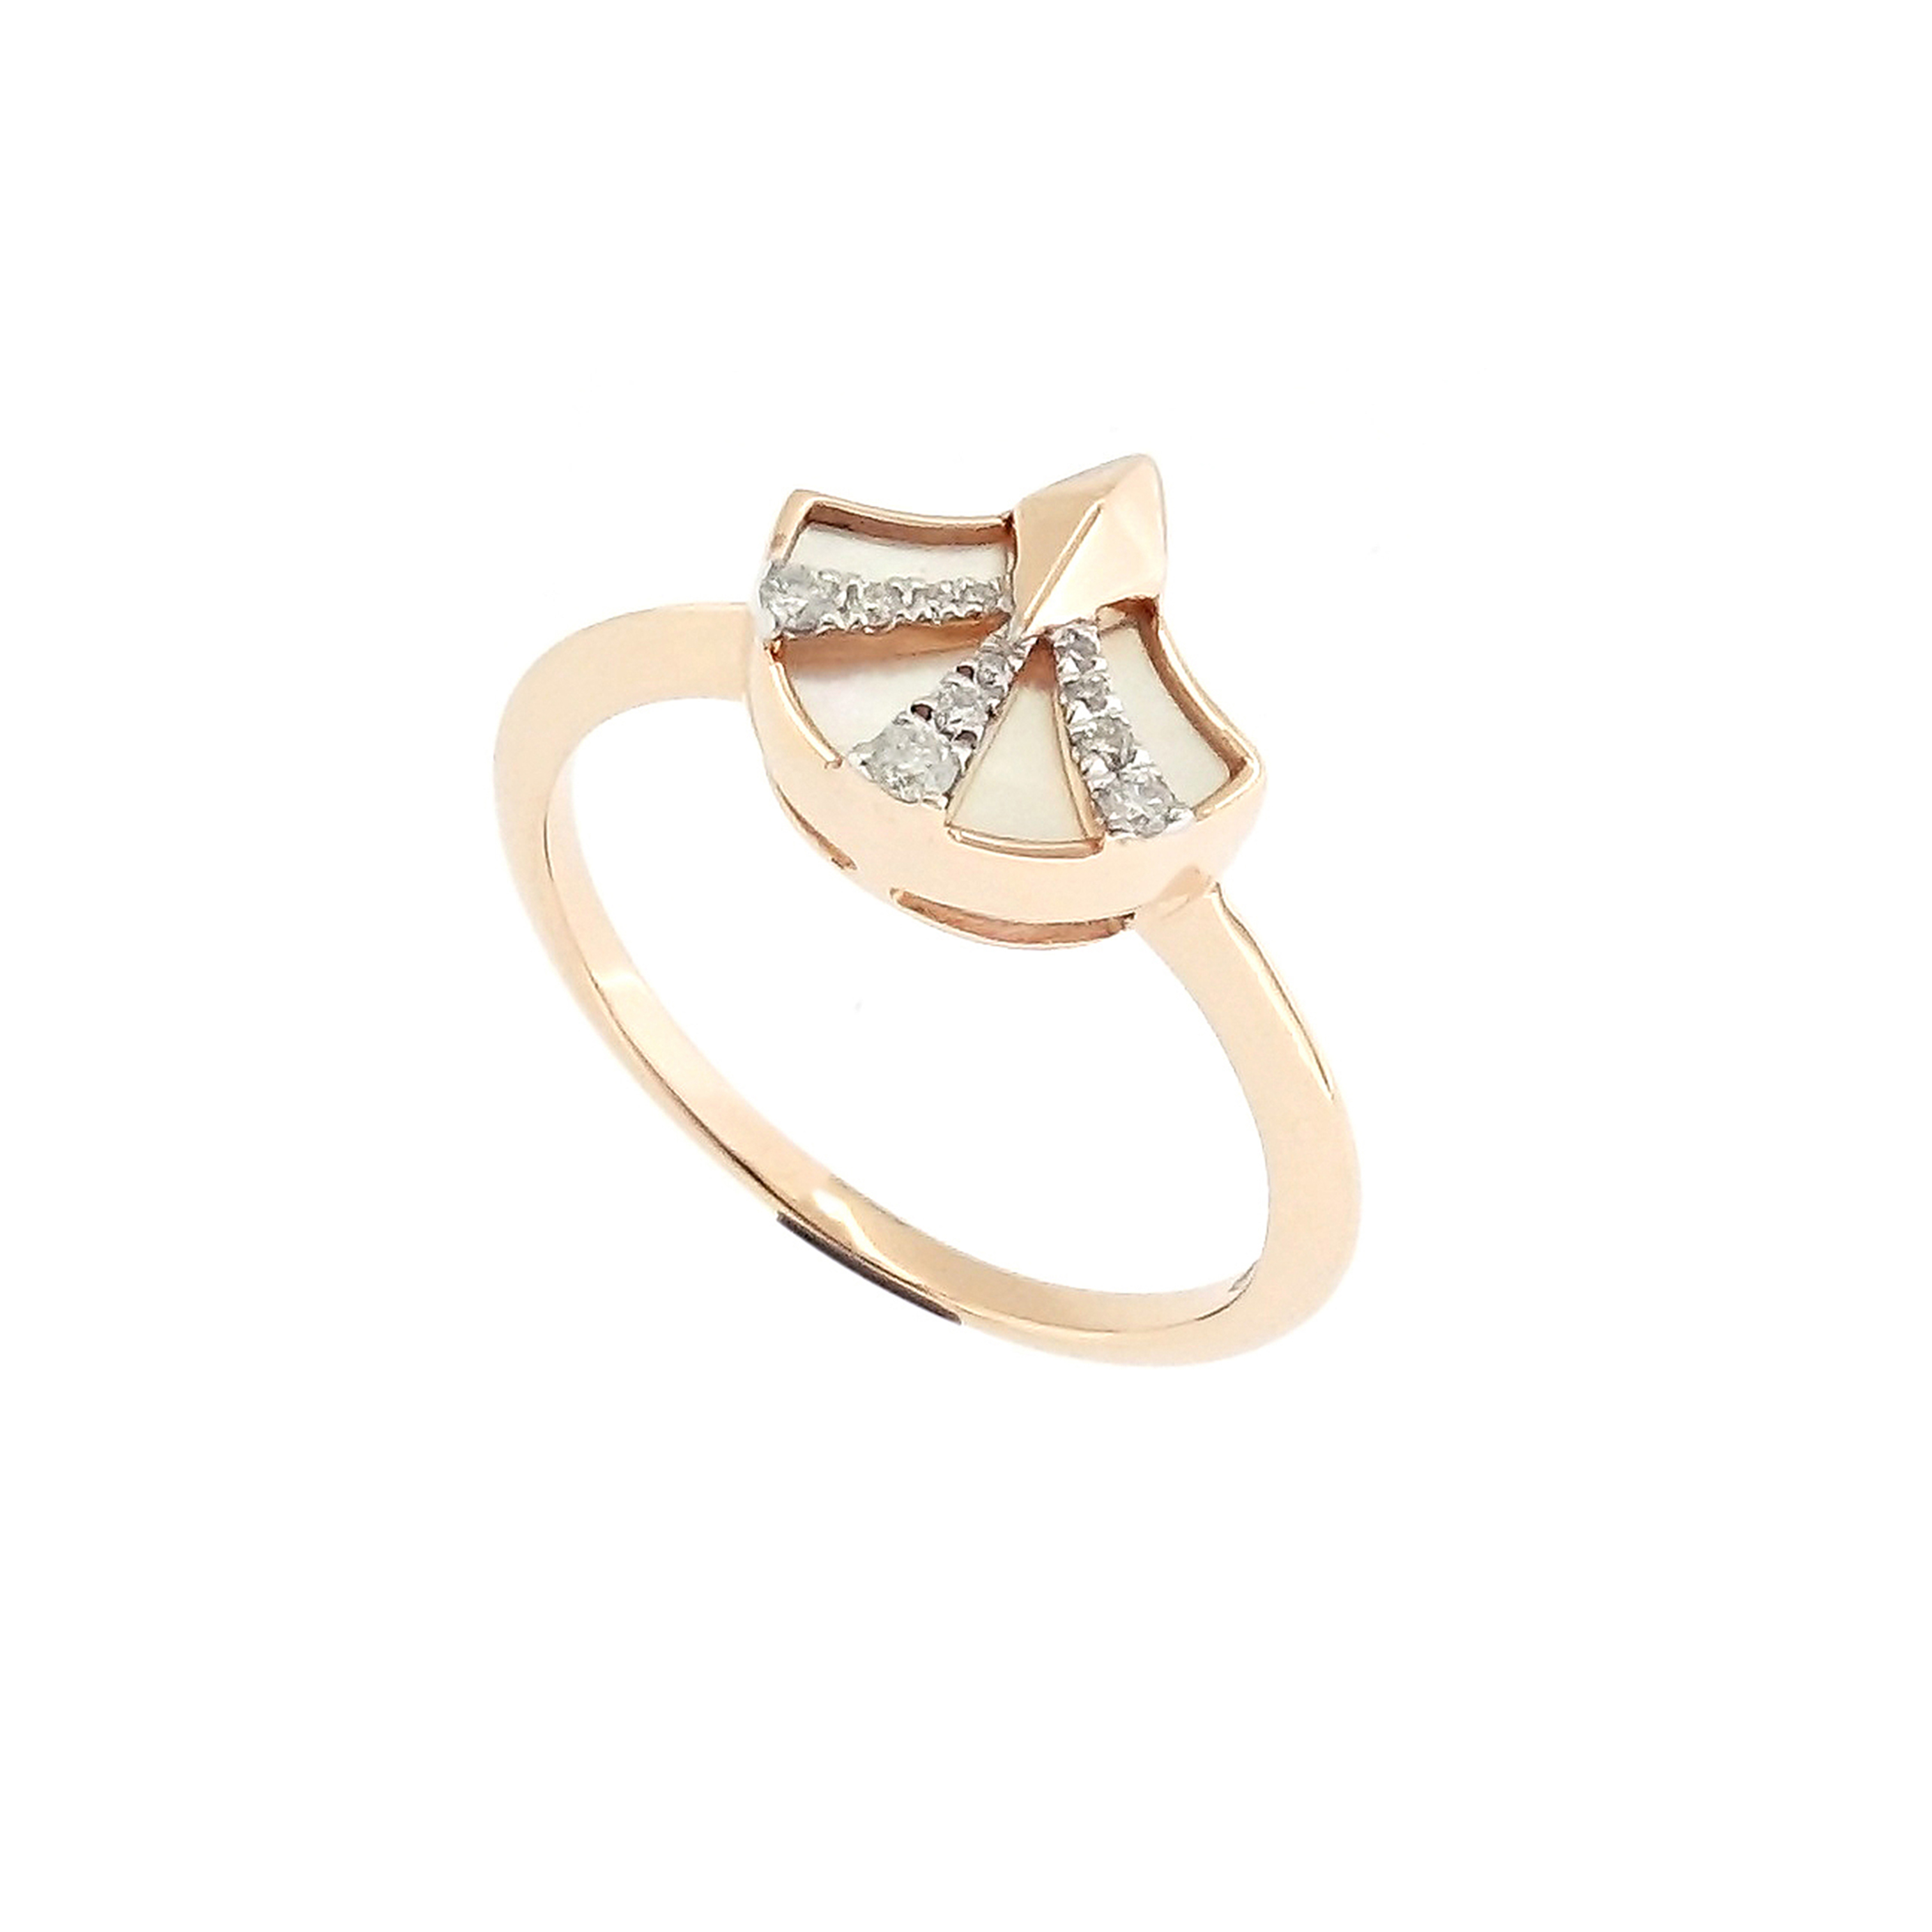 Mother of Pearl Diamond Ring